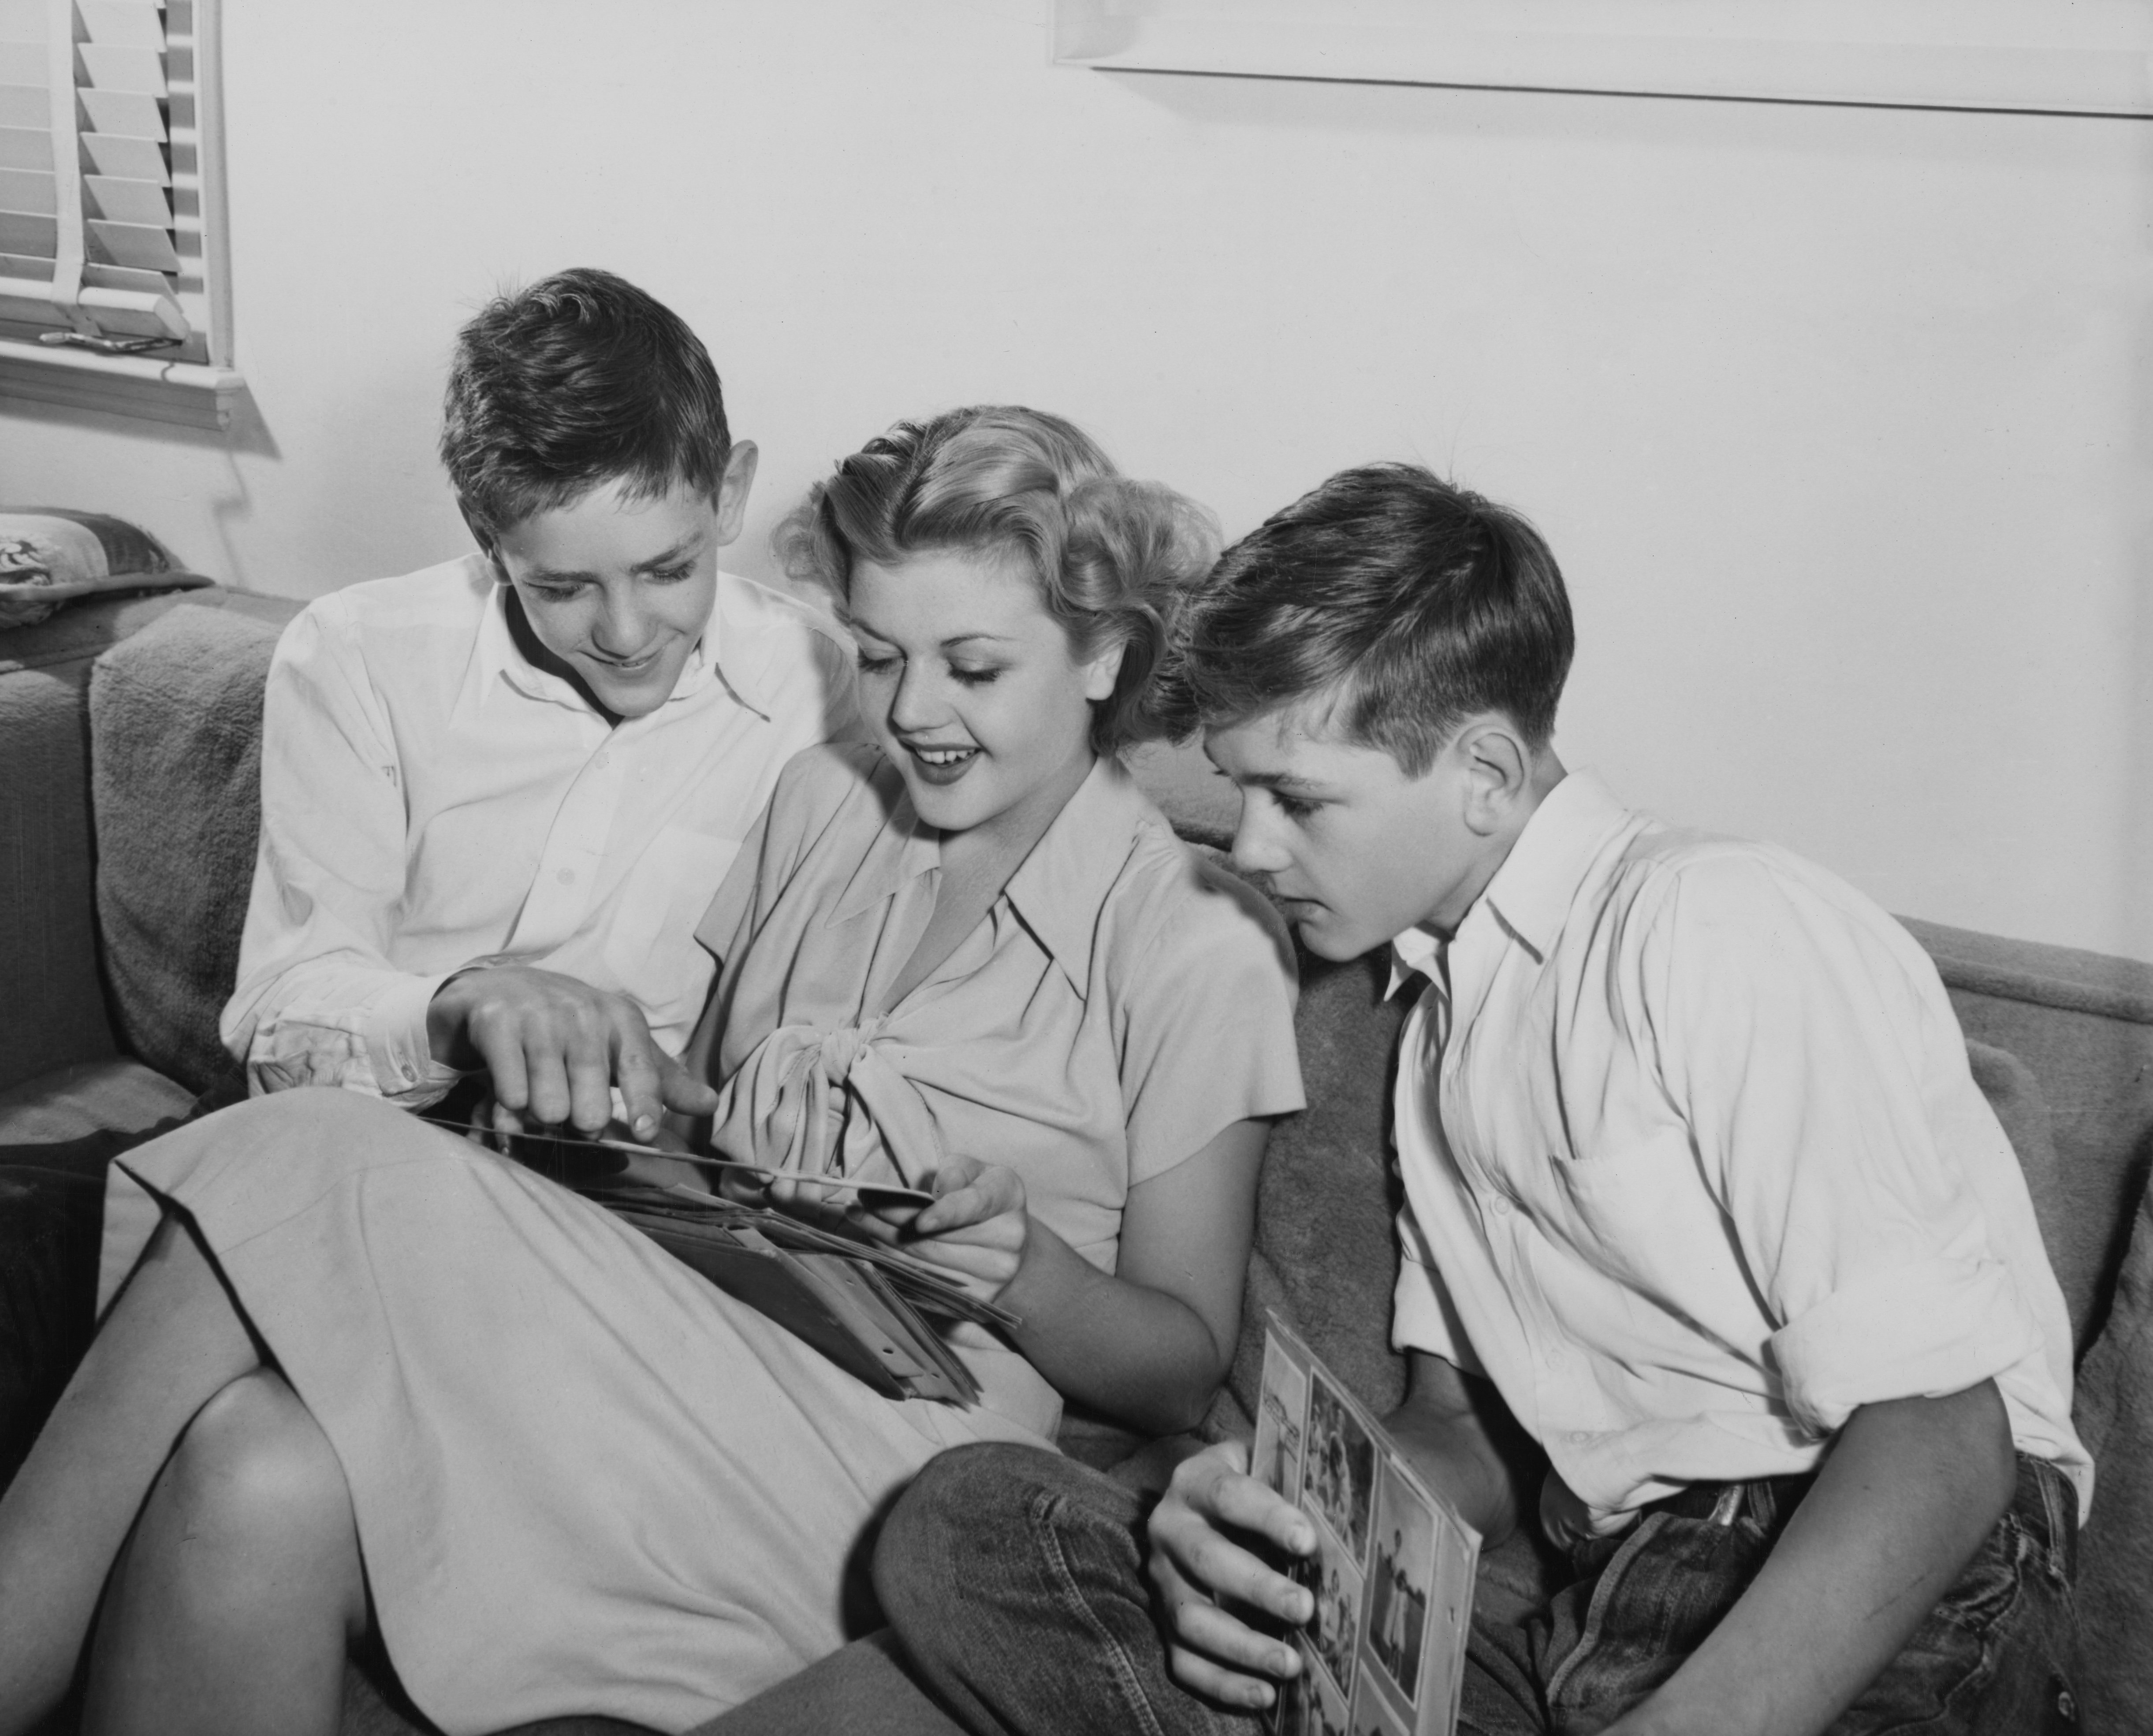 British-born Irish-American television producer and screenwriter Bruce Lansbury, with his sister Irish-British actress Angela Lansbury, and twin brother, British-born Irish-American film and television producer Edgar Lansbury, looking through a scrapbook at the family home in London, England, circa 1945. | Source: Getty Images